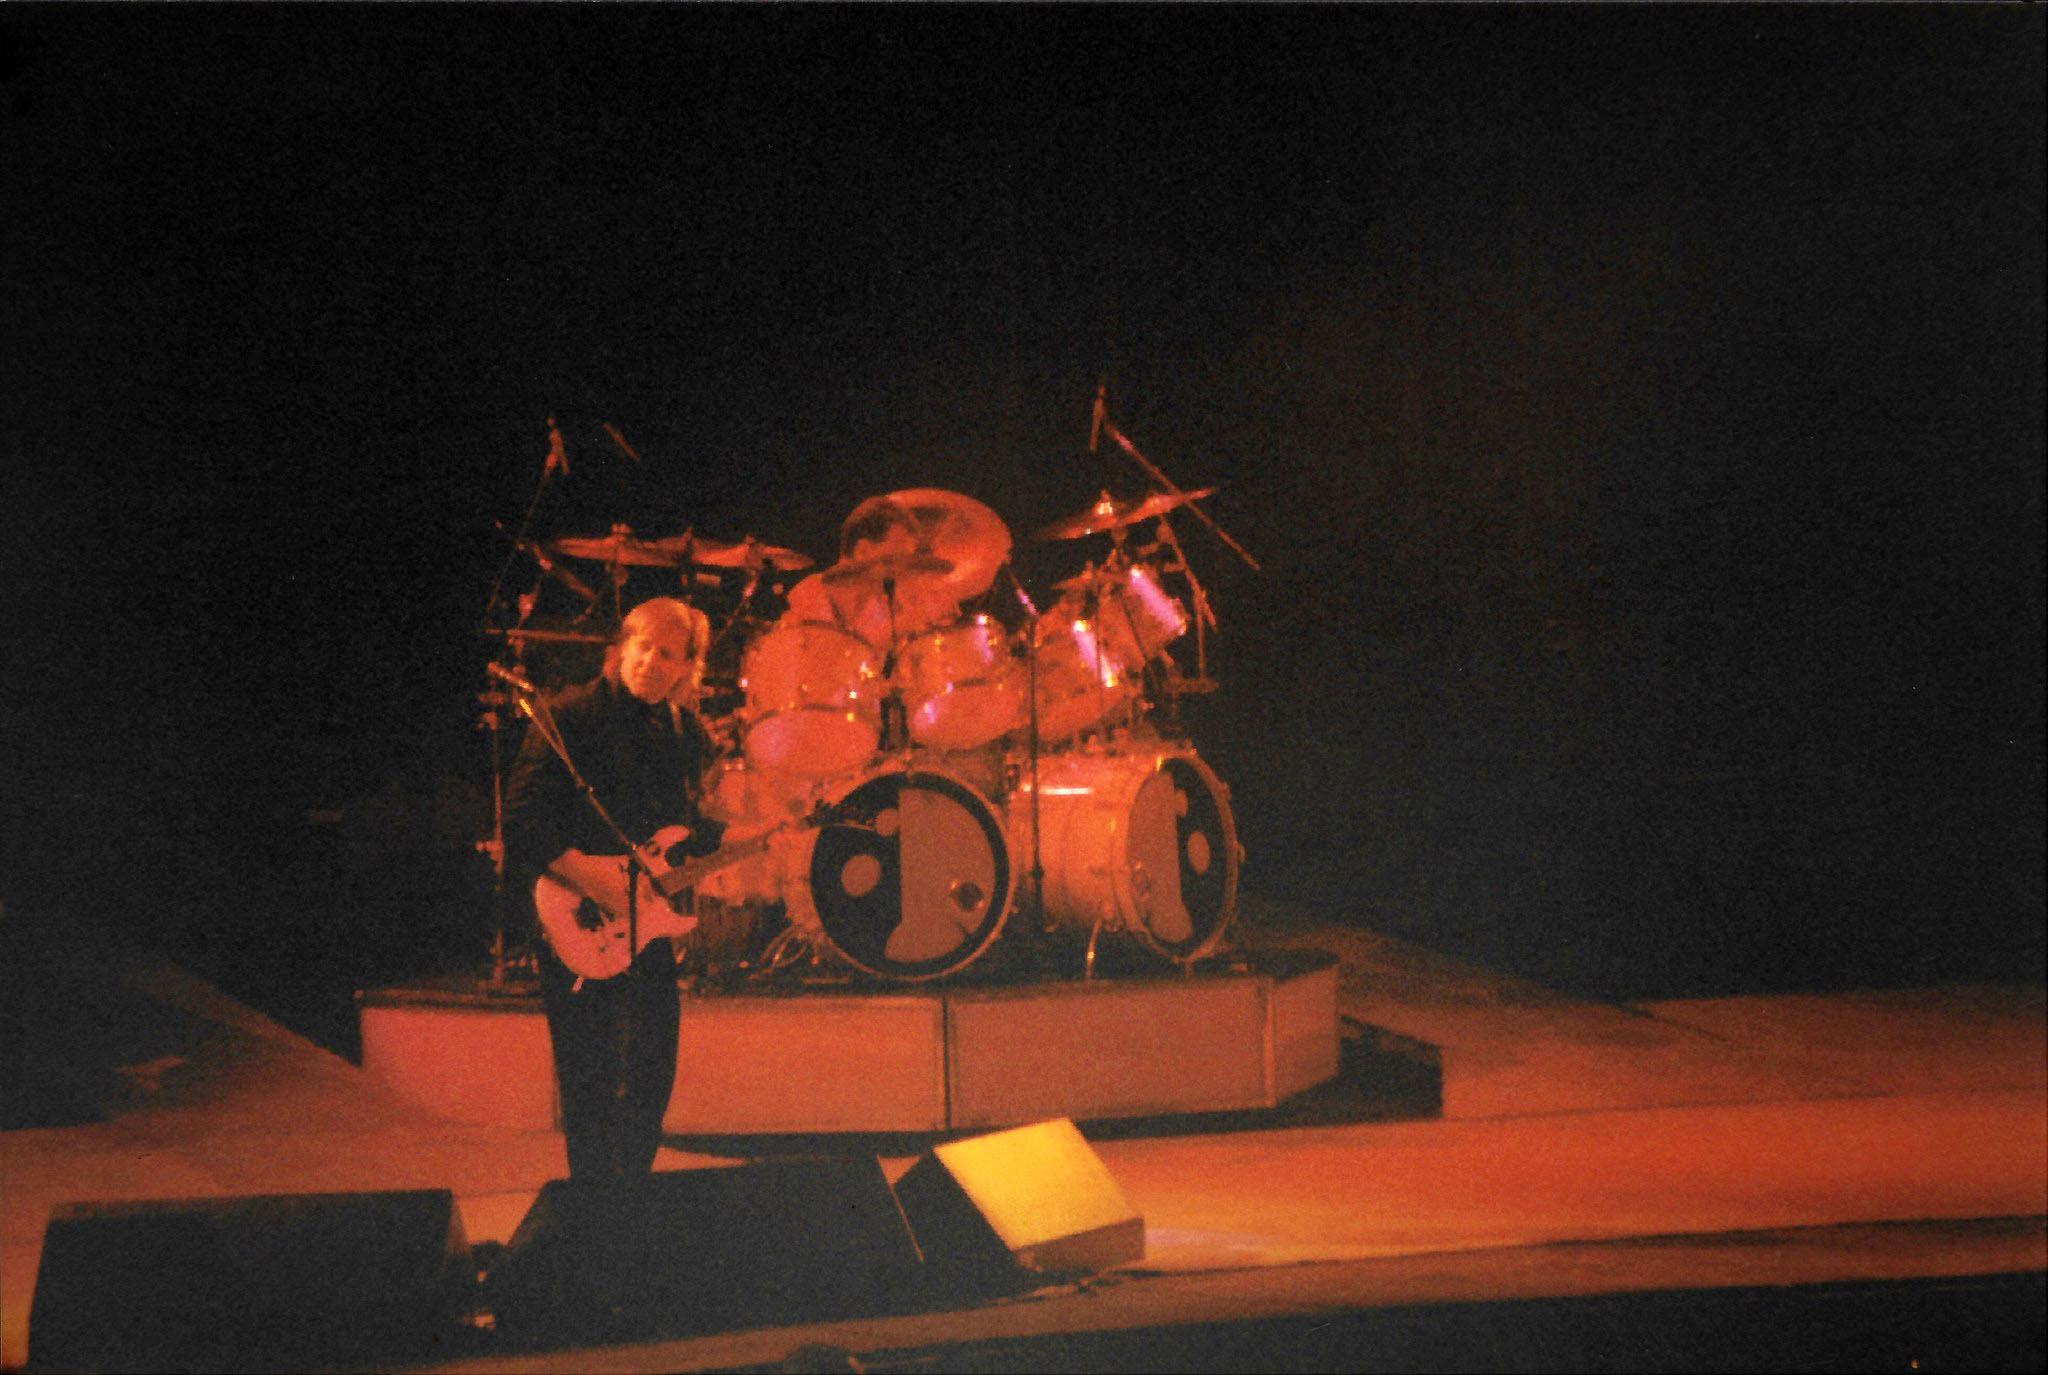 Rush Hold Your Fire Tour Pictures - London, England - April 28th, 1988